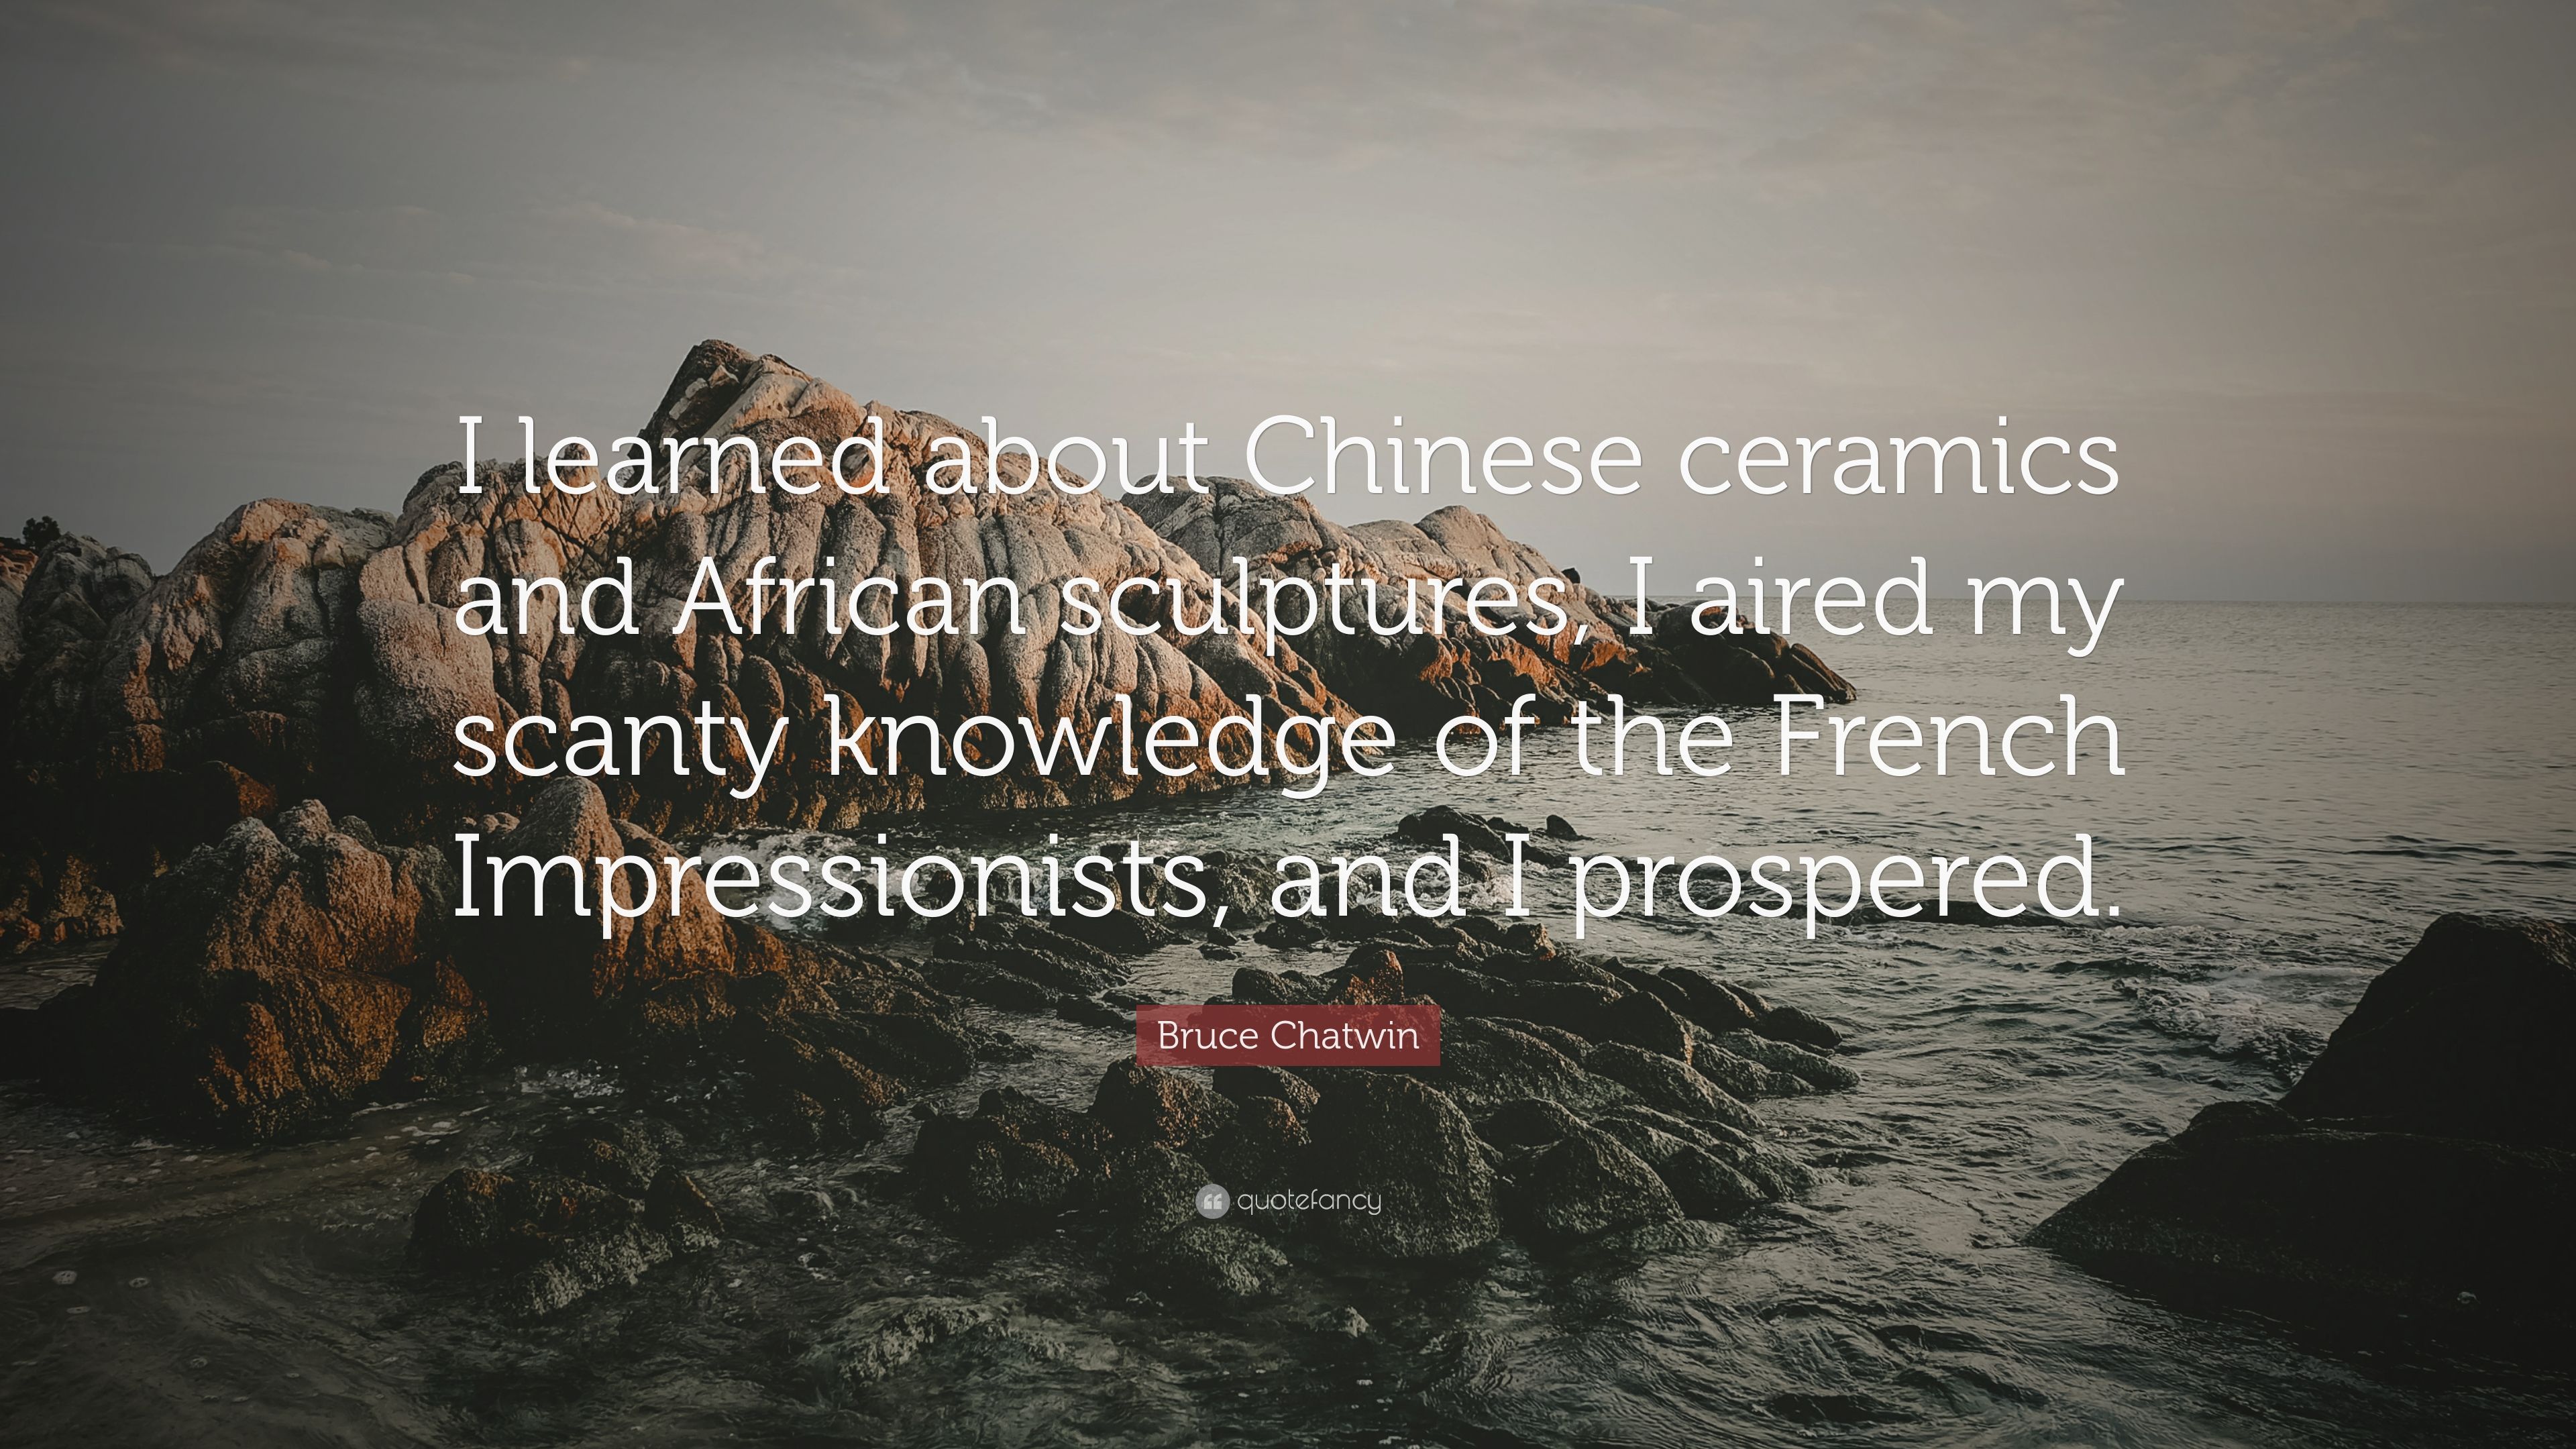 Bruce Chatwin Quote: “I learned about Chinese ceramics and African sculptures, I aired my scanty knowledge of the French Impressionists, and I.” (7 wallpaper)